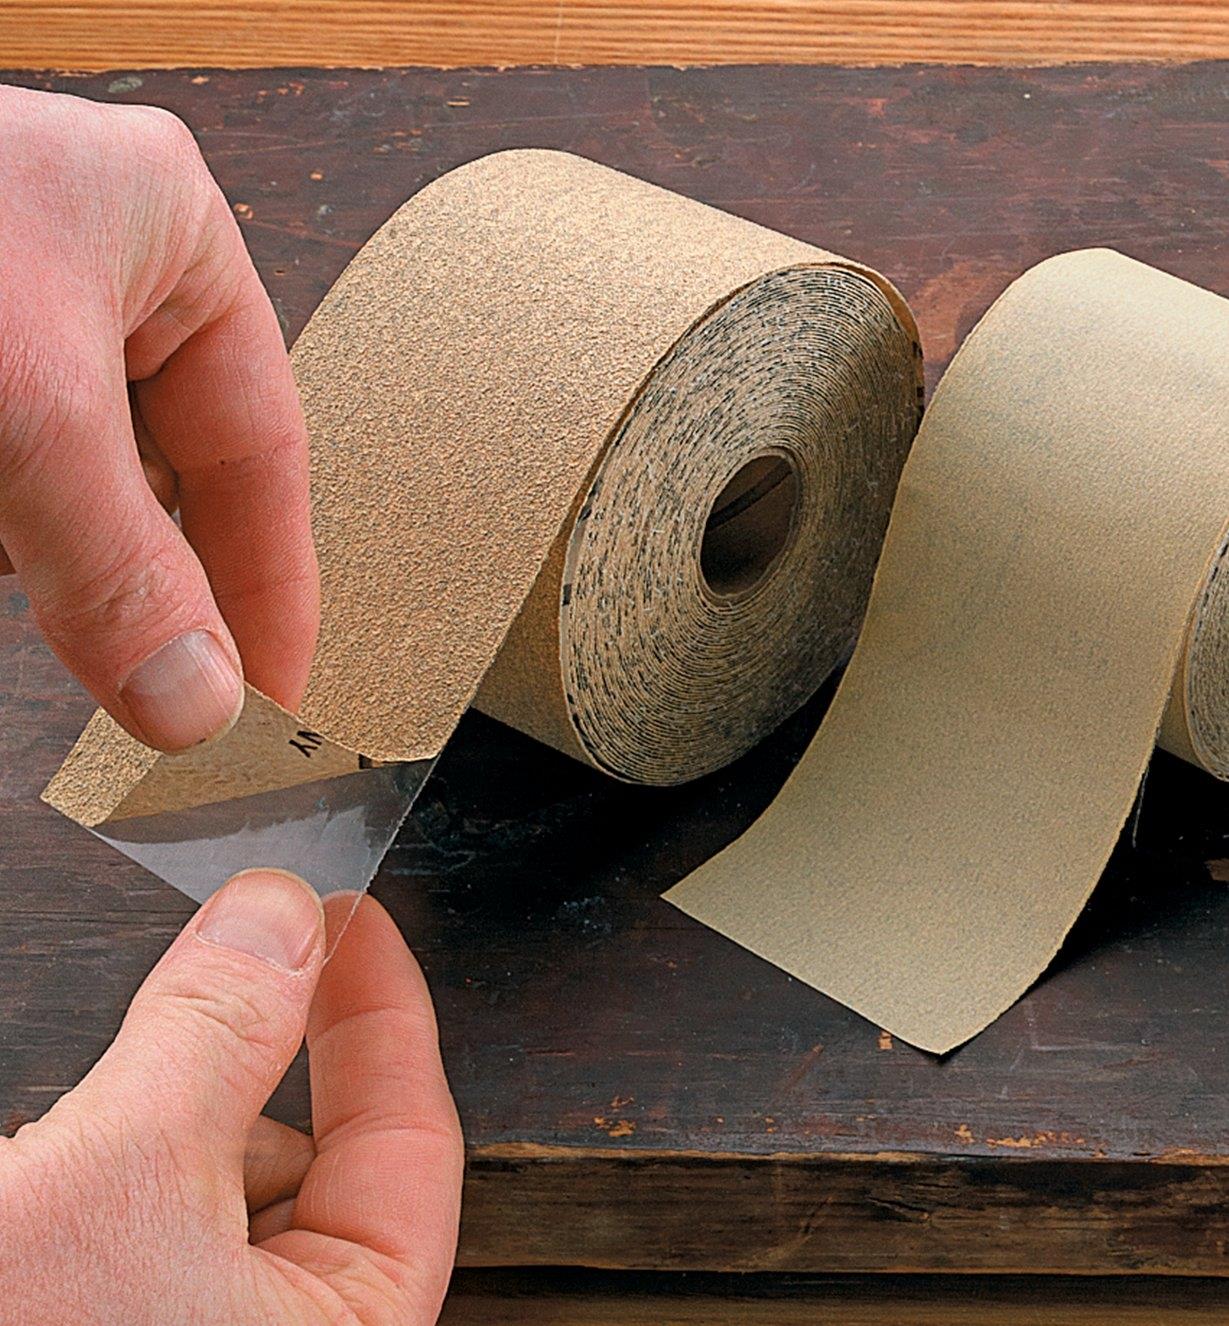 Peeling the backing off a PSA Sandpaper Roll